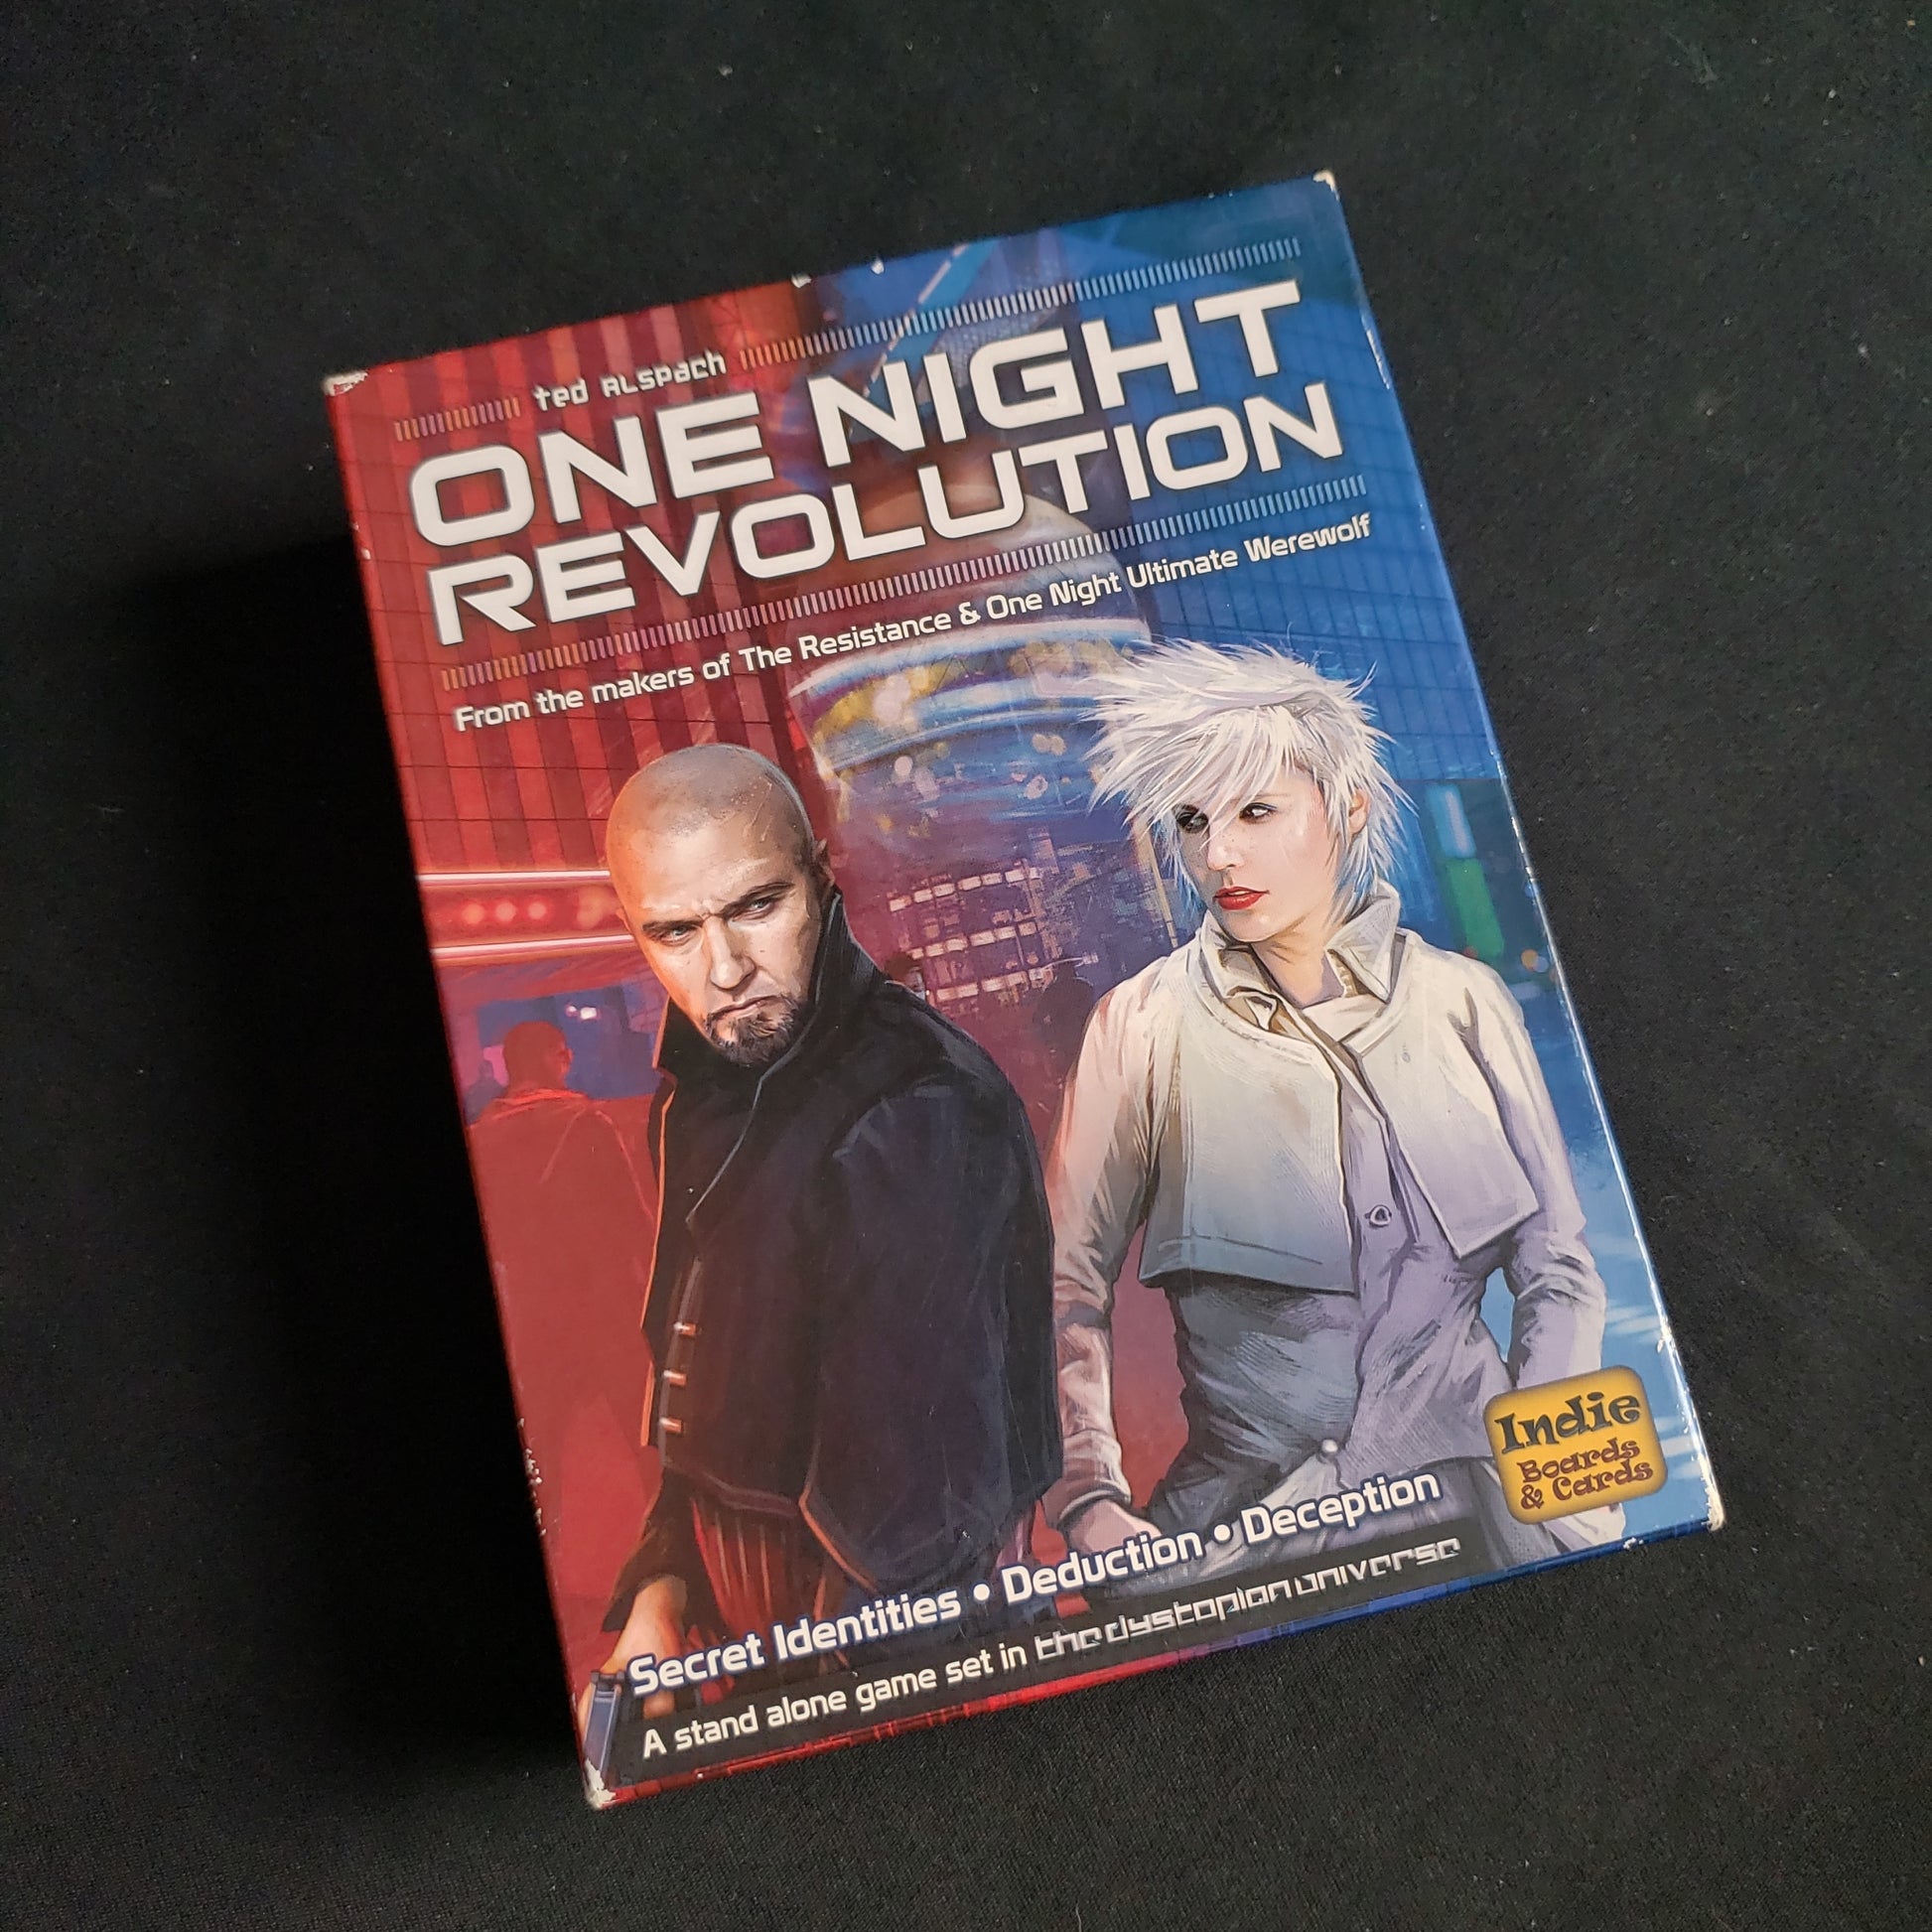 Image shows the front cover of the box of the One Night Revolution game